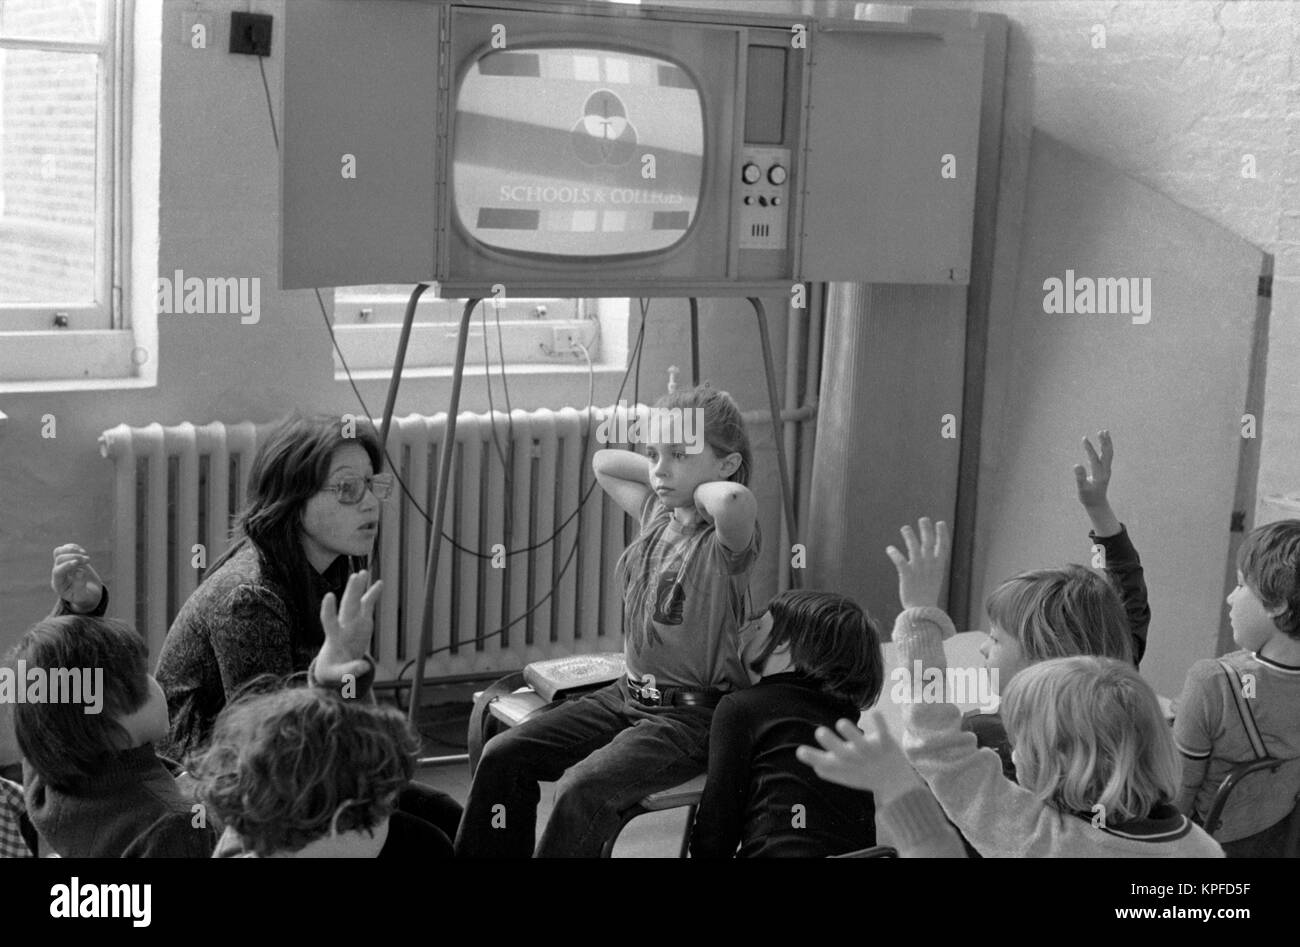 Primary school children 1970s England watching television in classroom with their teacher. 70s UK HOMER SYKES Stock Photo